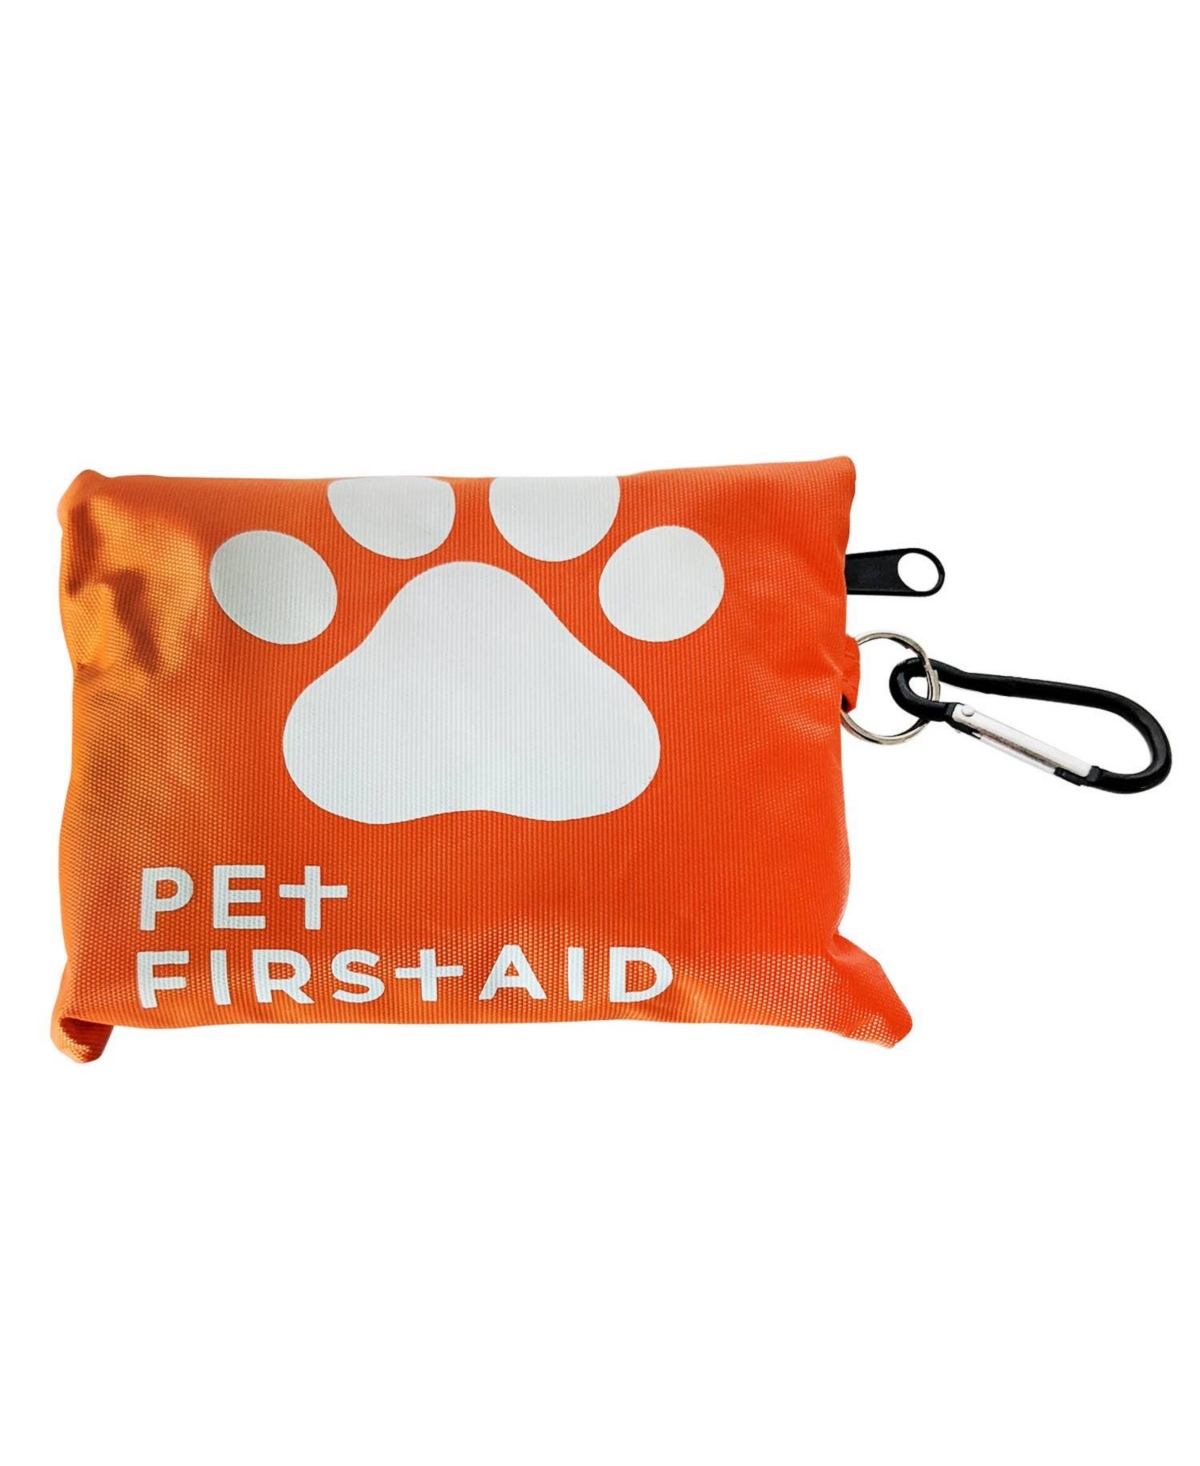 19 Piece Pet Travel First Aid Kit with Carabiner - Open Miscellaneous